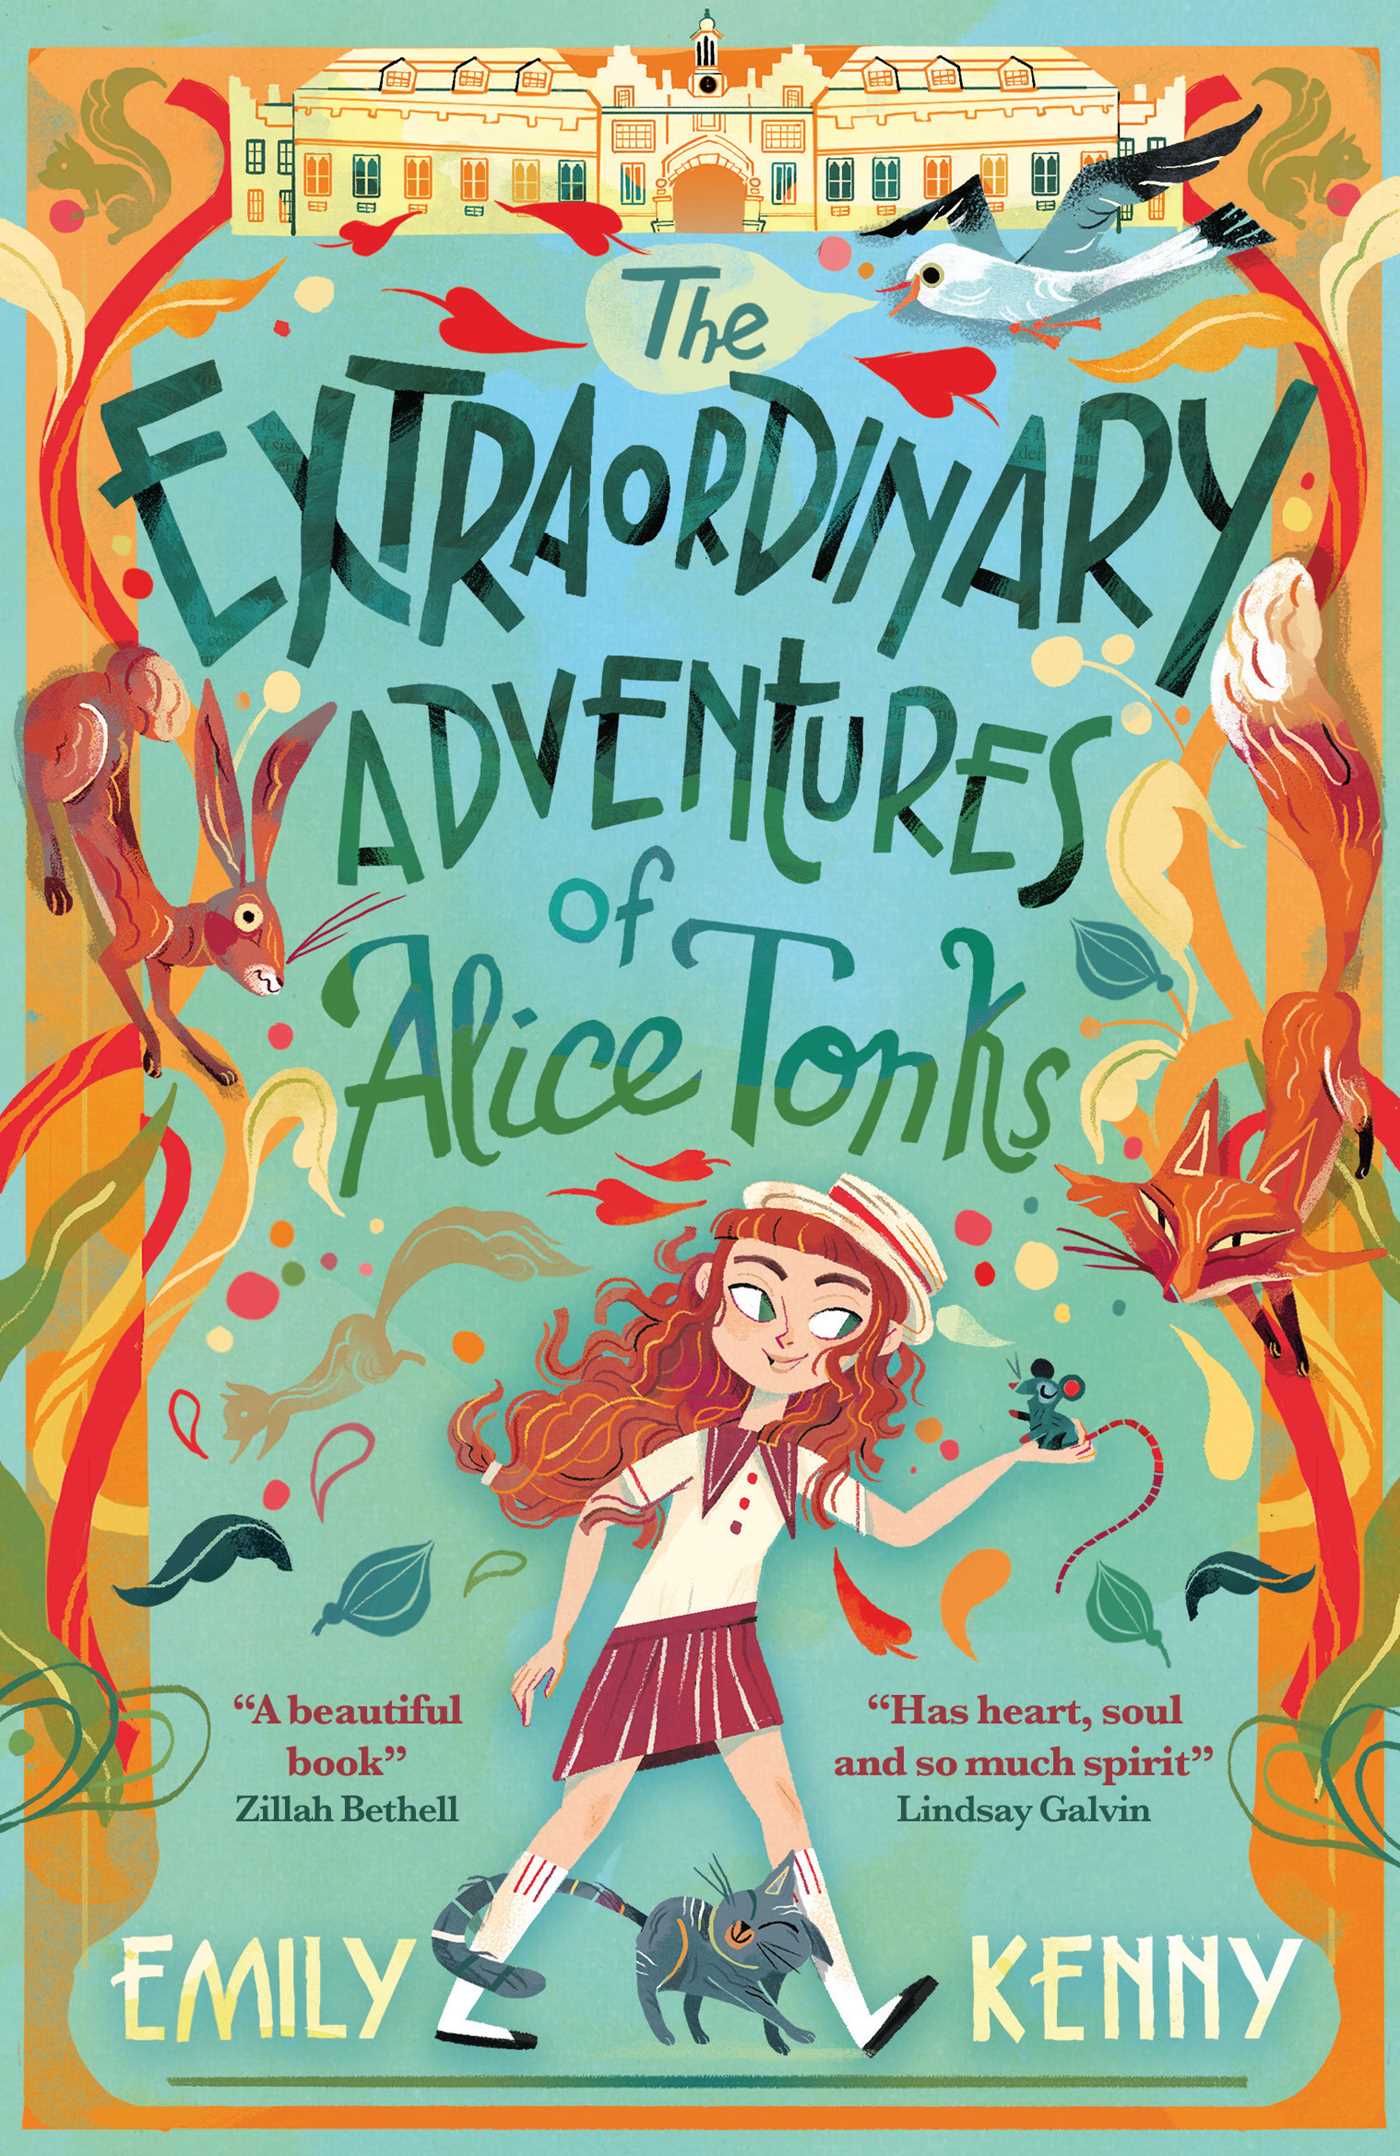 The Extraordinary Adventures of Alice Tonks : Longlisted for the Adrien Prize, 2022 | Kenny, Emily